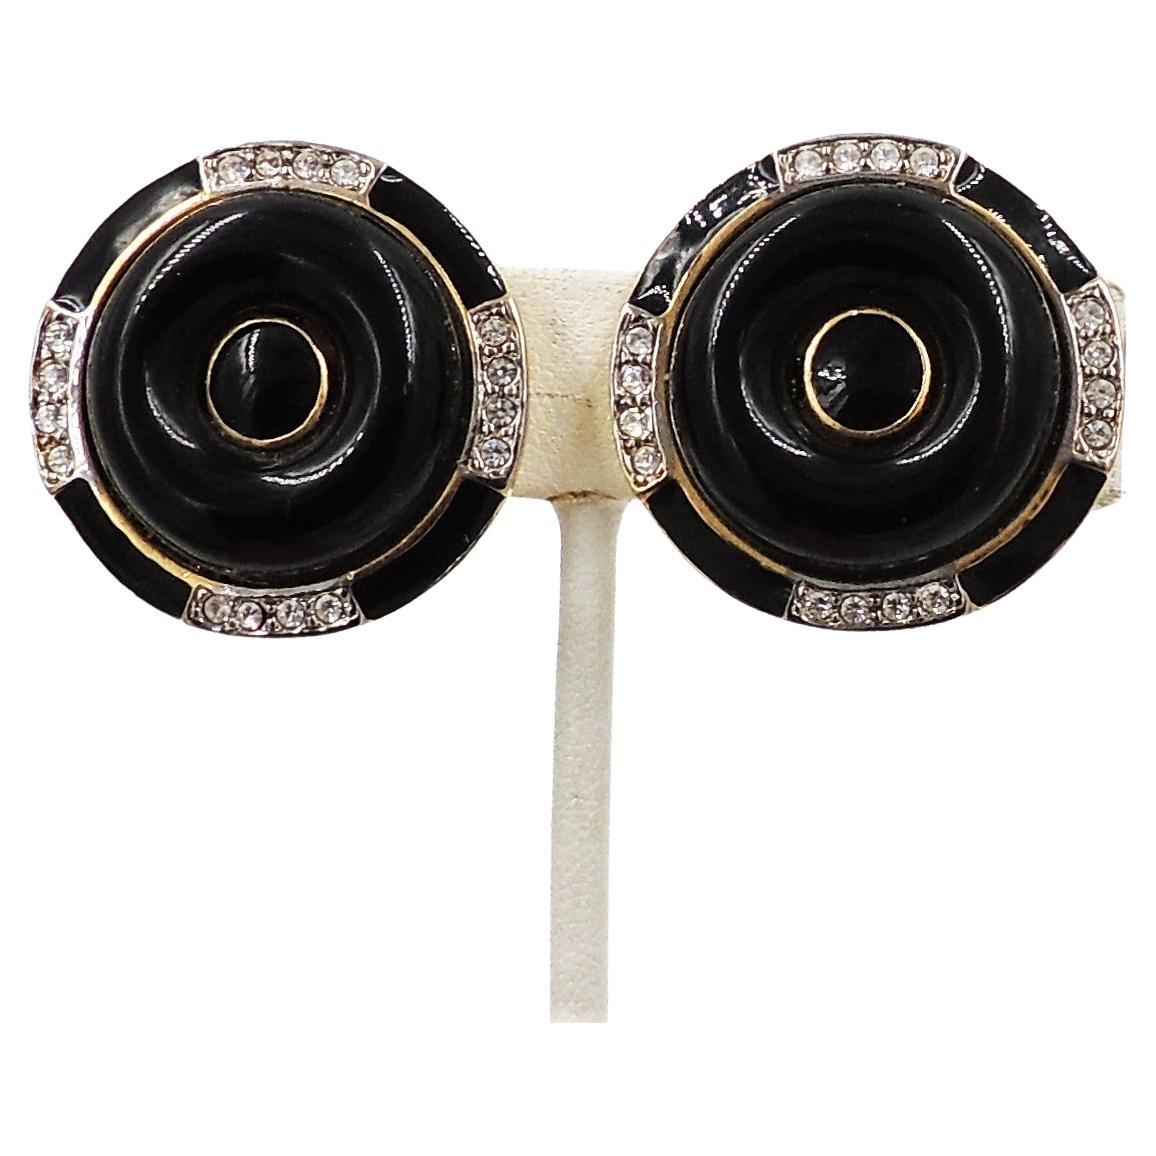 Vintage 1980s Signed Kenneth Lane Deco Style Faux-Onyx Cabochon Earrings For Sale